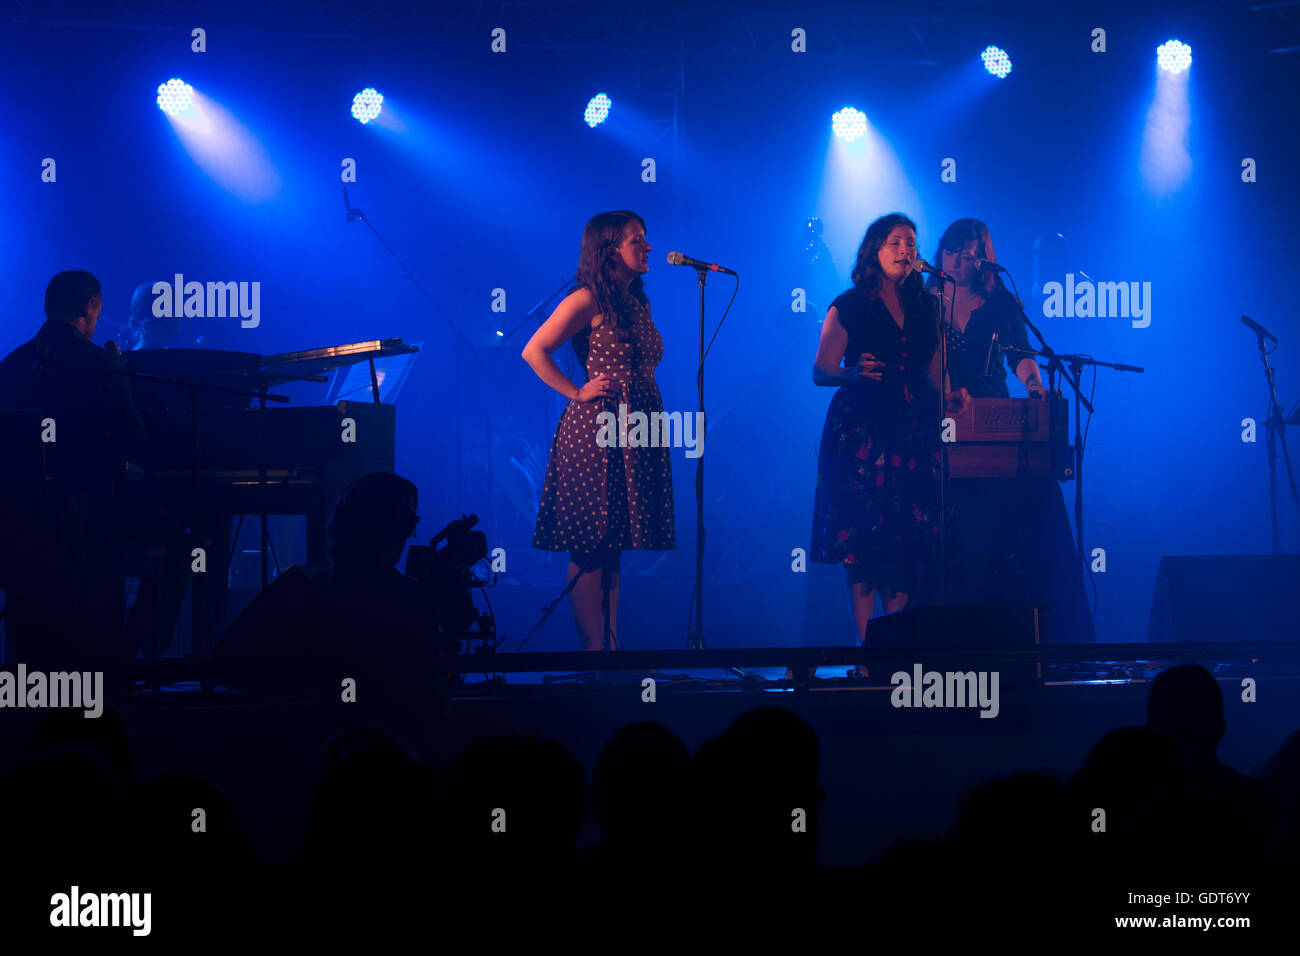 Warwick, Warwickshire, England, UK. . 21st July, 2016. The Unthanks perform on the opening evening of the Warwick Folk Festival. The festival continues throughout the weekend and includes many performances of music and folk dancing in and around the town of Warwick. Credit:  Colin Underhill/Alamy Live News Stock Photo